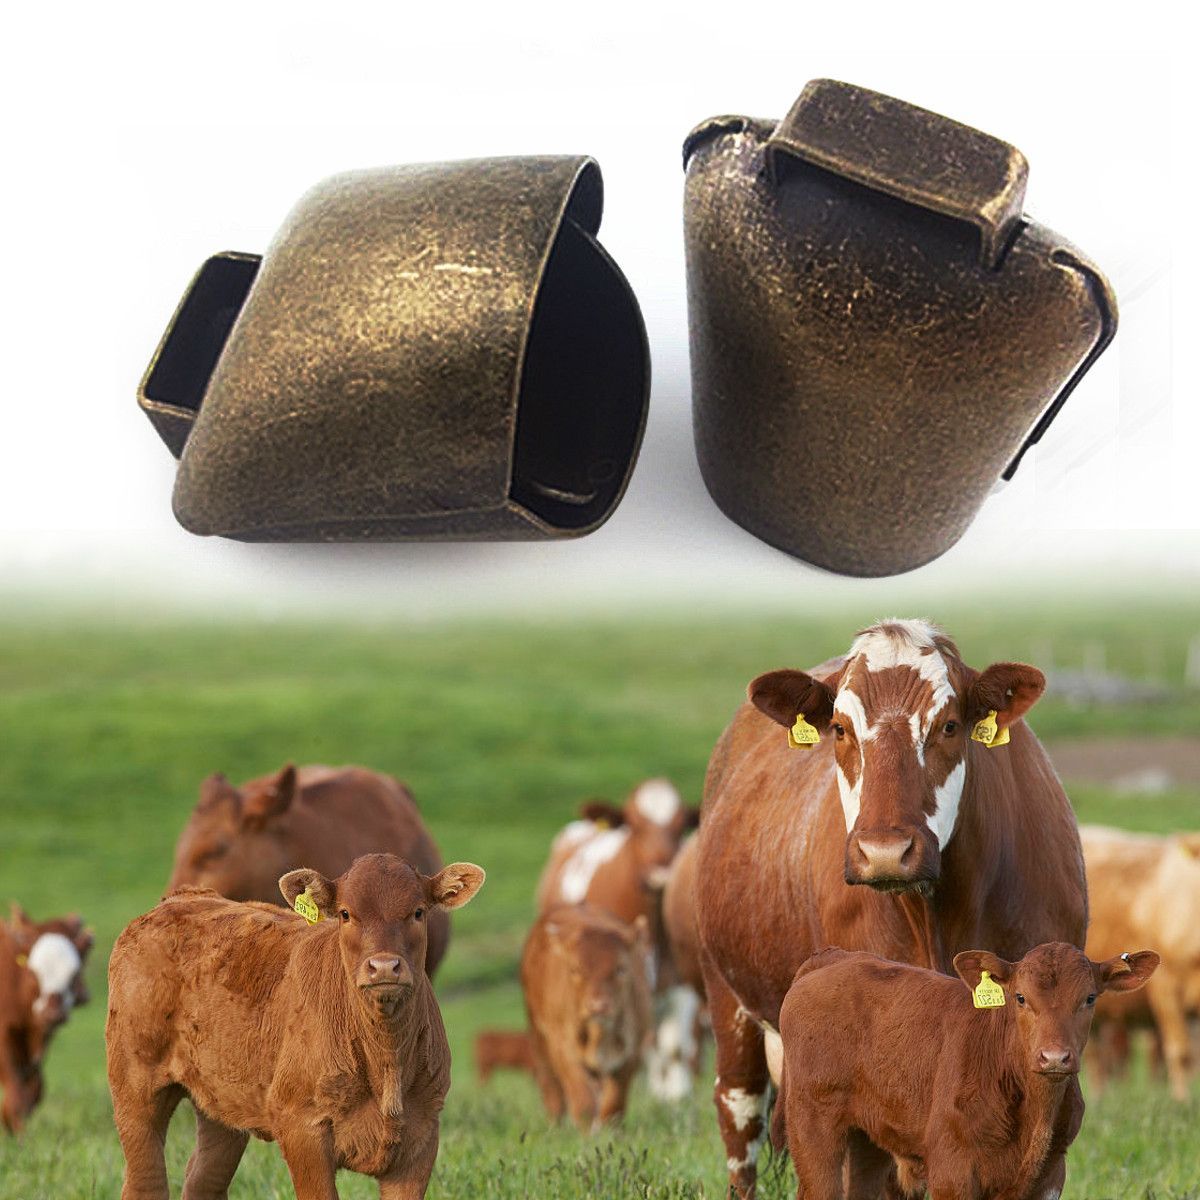 Cow-Horse-Sheep-Grazing-Copper-Bells-Cattle-Outdoor-Farm-Animal-Loud-Brass-Bell-Decorations-1381100